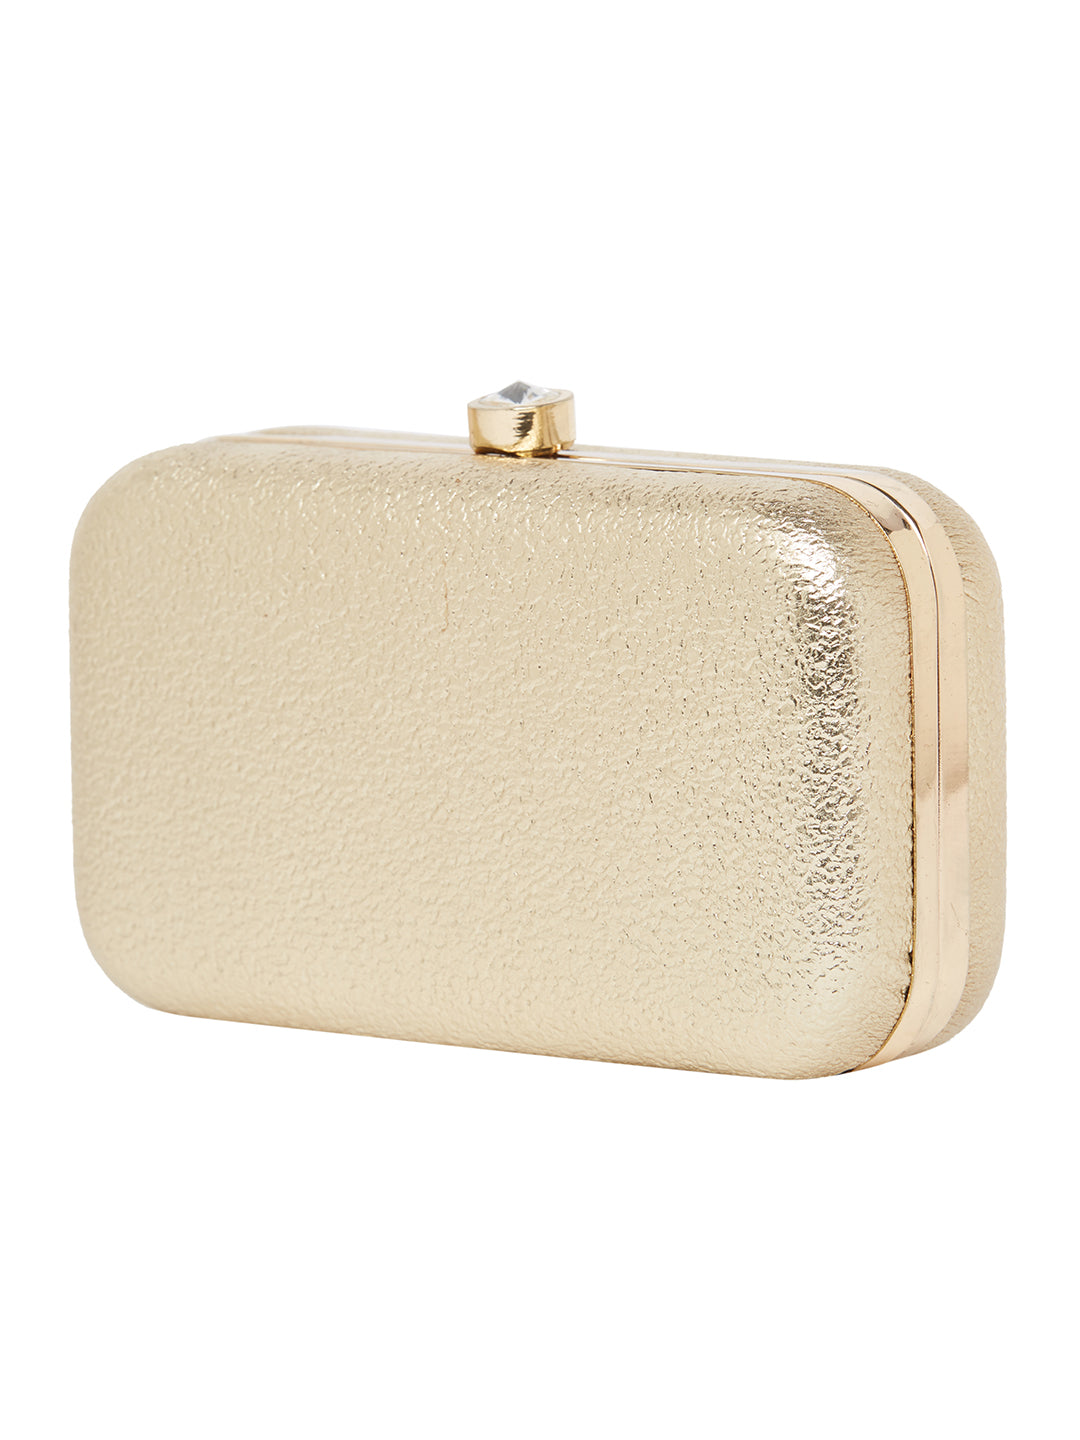 A Vdesi Base gold clutch bag with a metal clasp and a metal chain for added convenience.